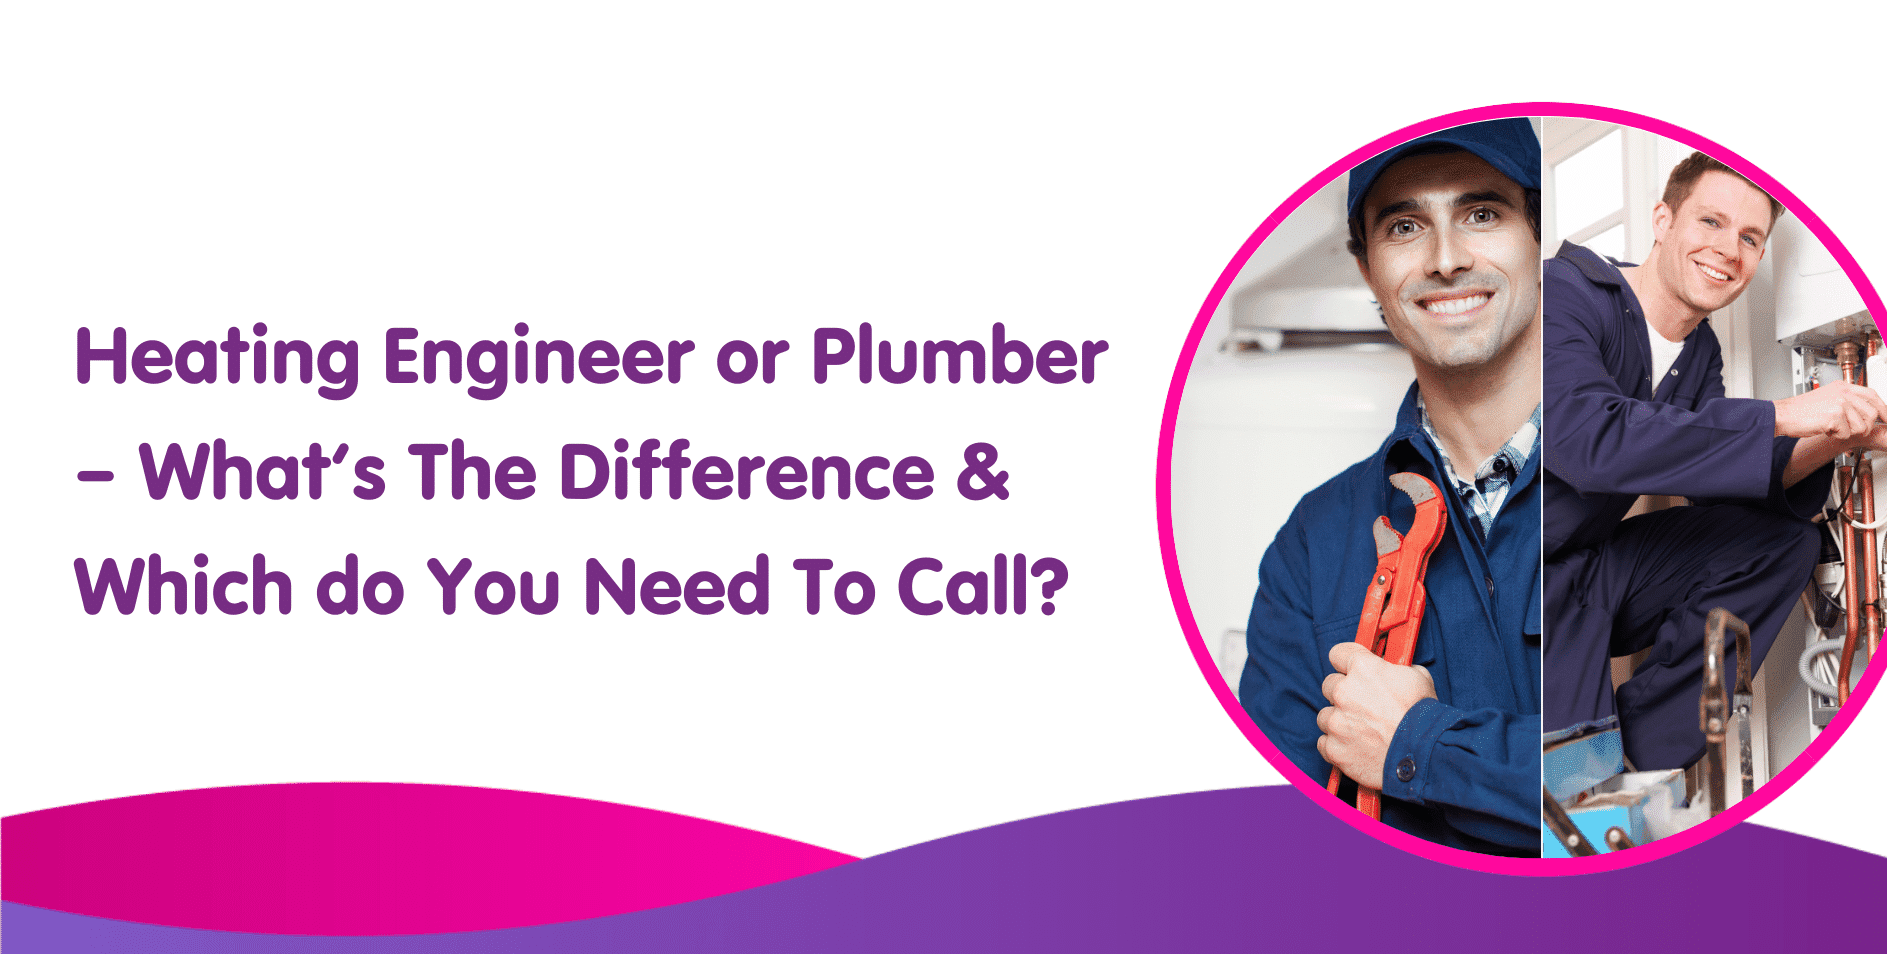 Heating Engineer or Plumber and What’s The Difference?